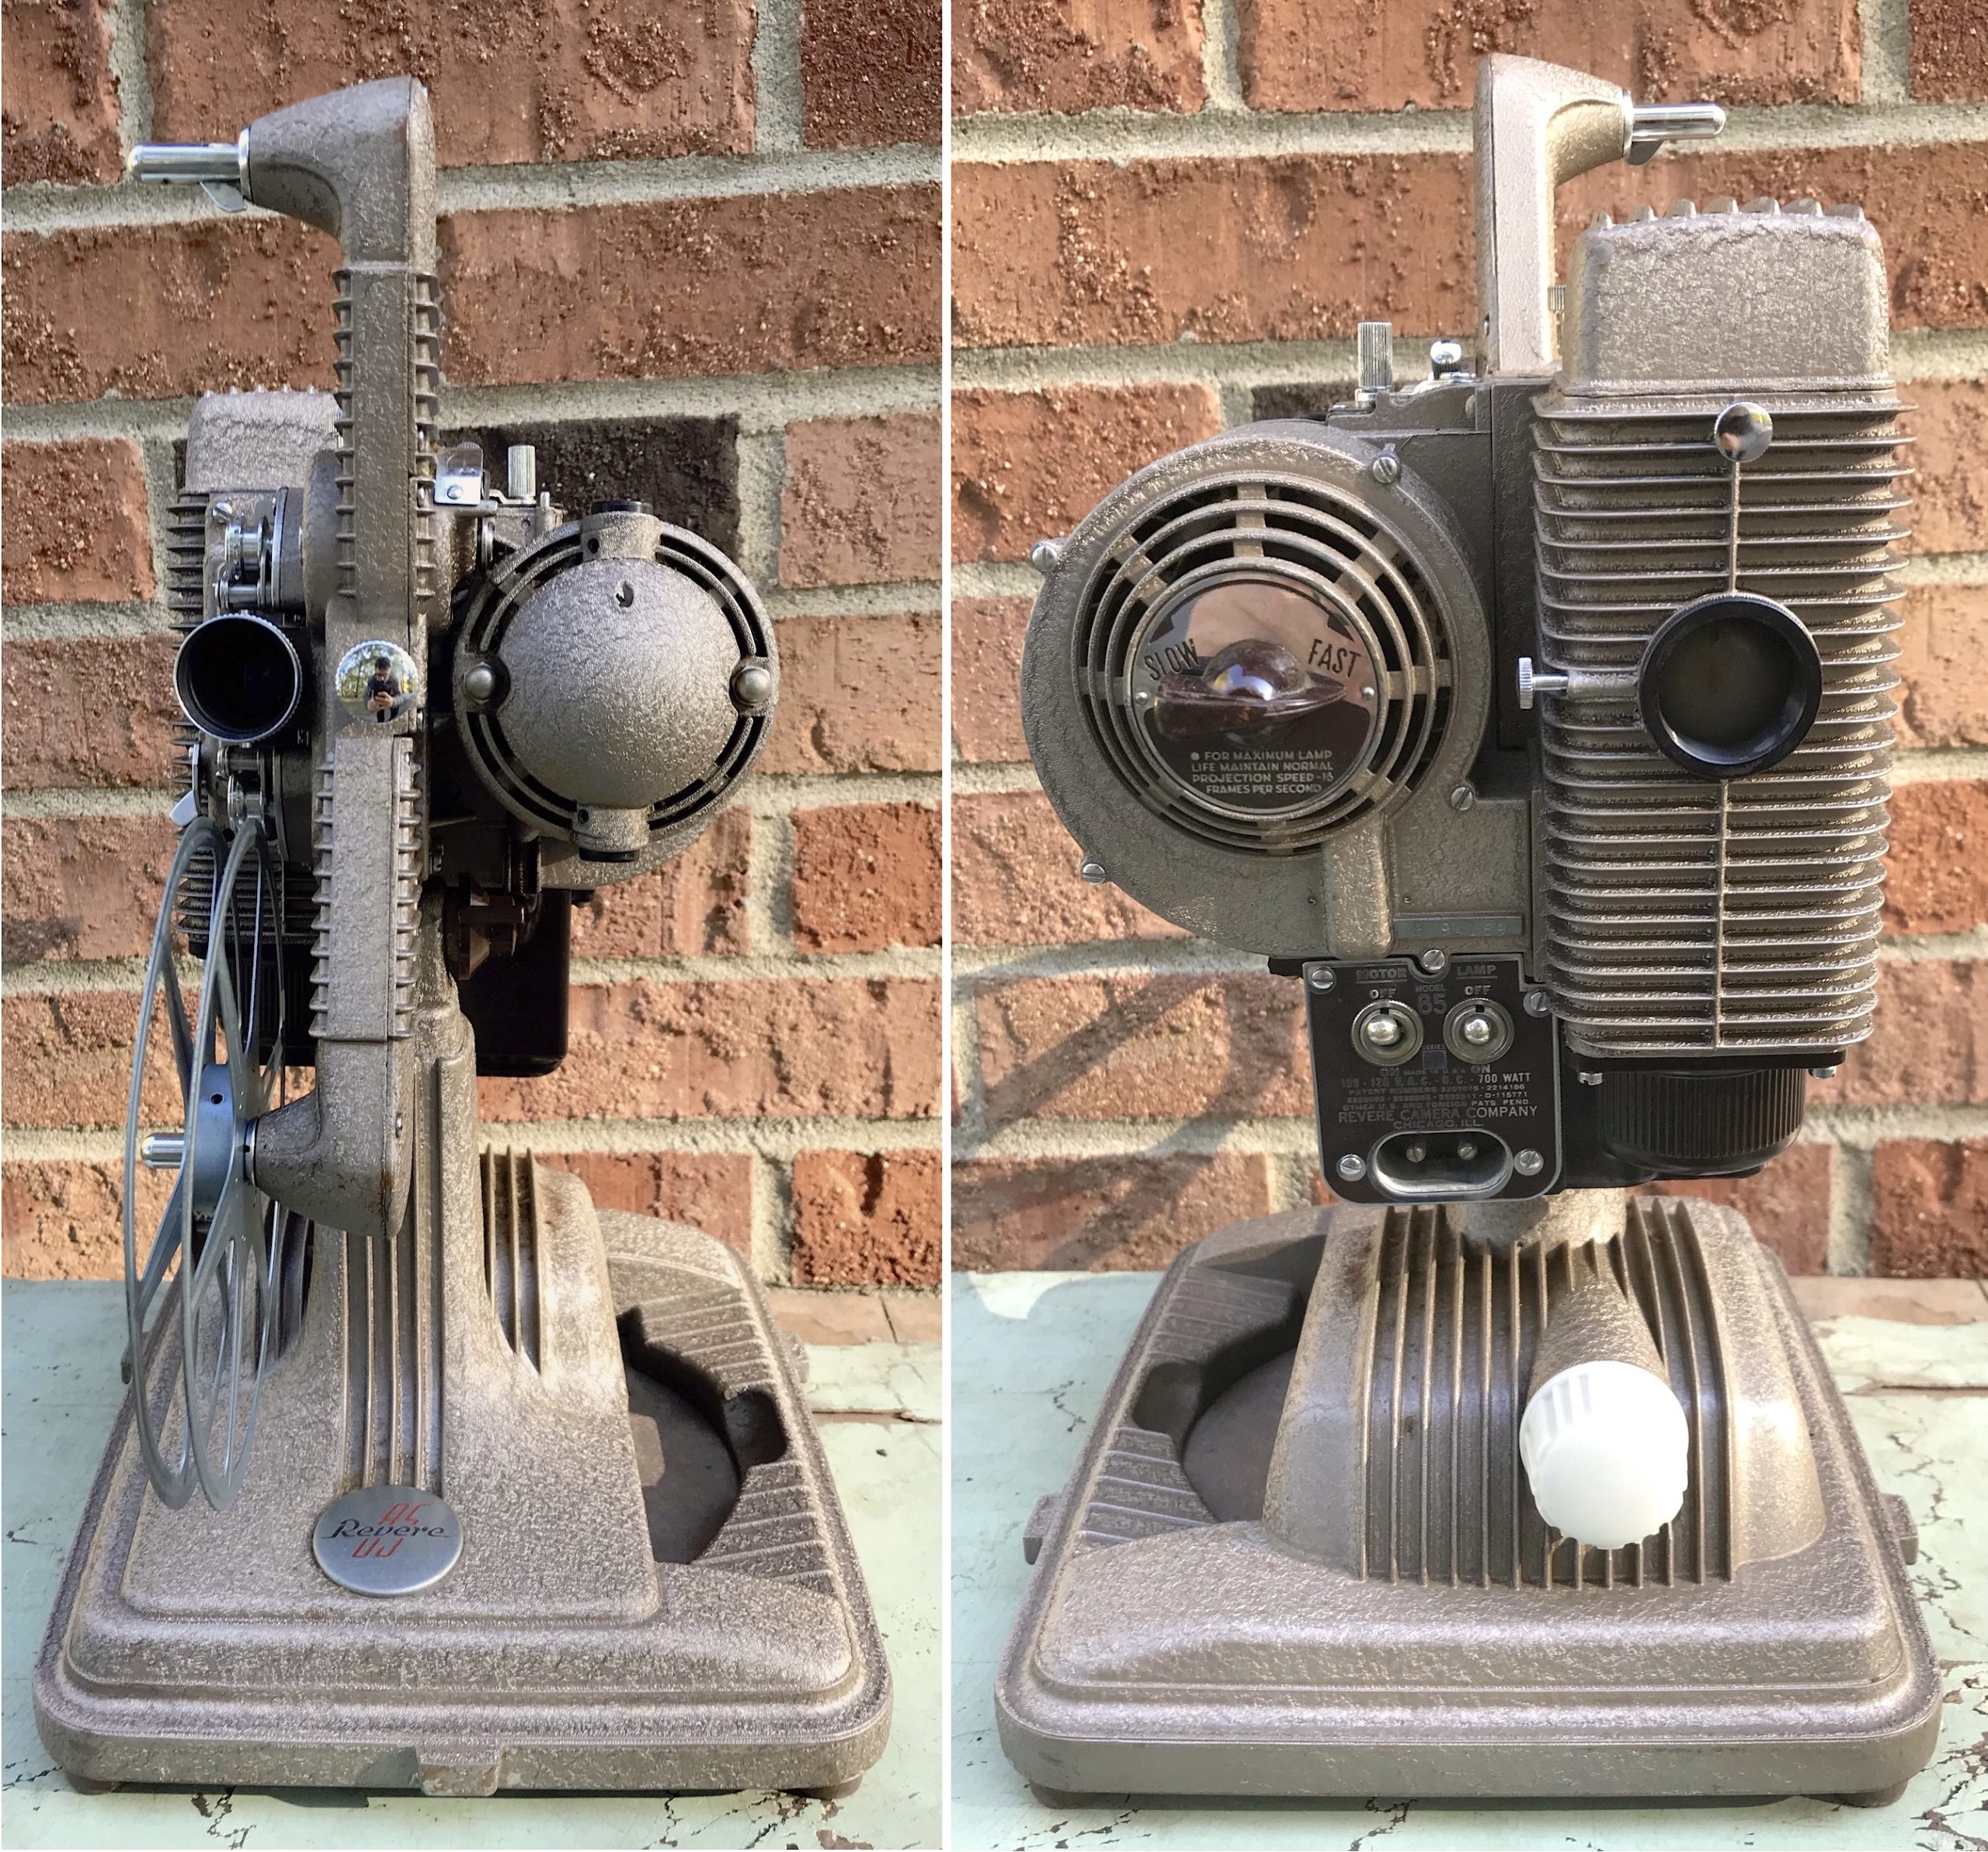 Revere Model 80 8mm Film Projector 1940s - P 1279 Museum Quality